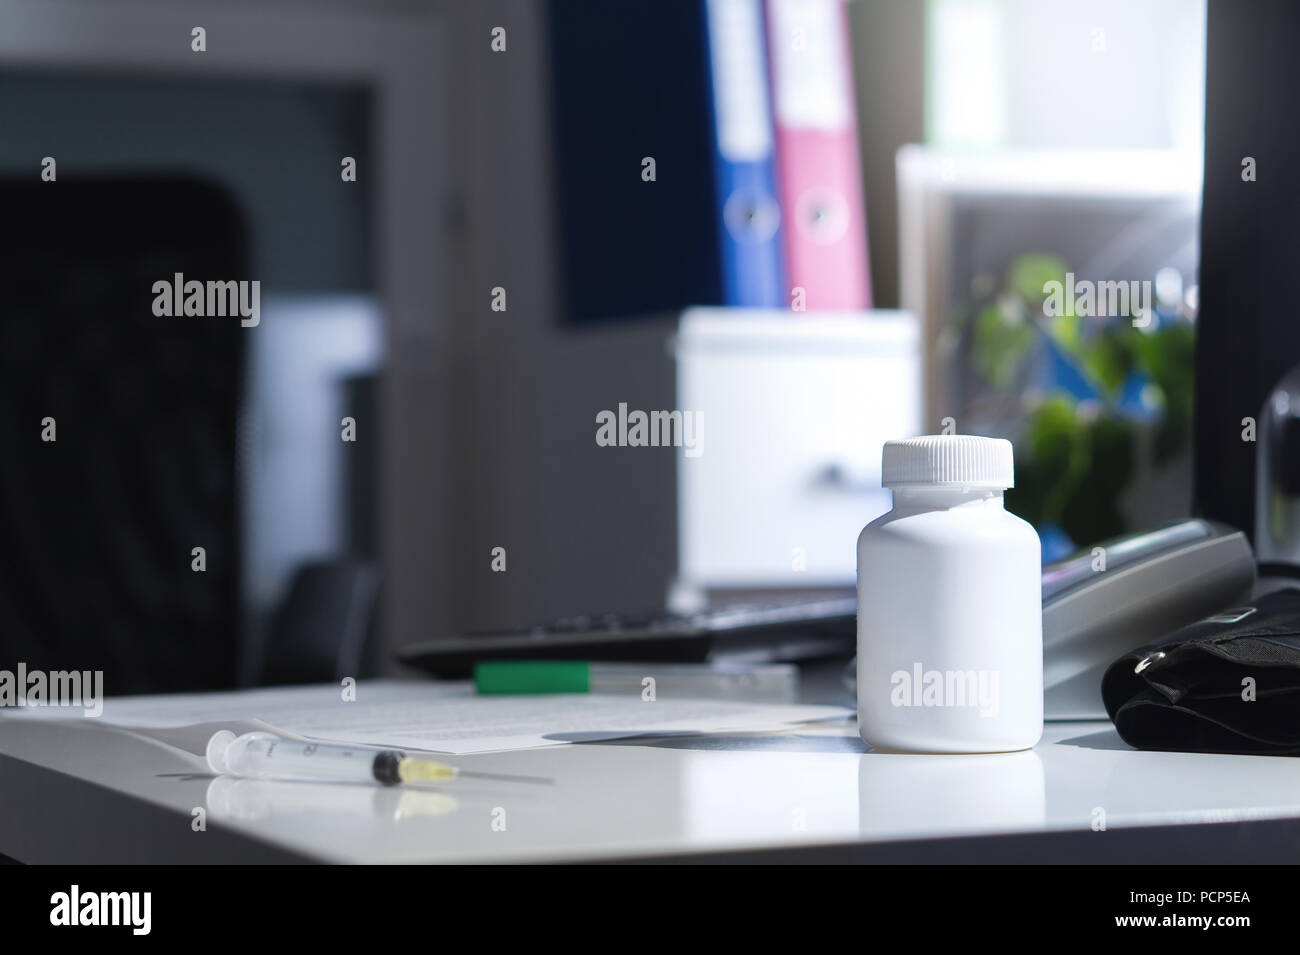 Malpractice, bad healthcare, negligence, medical fraud or abuse or treatment error concept. Medicine bottle on table and desk in doctor office. Stock Photo